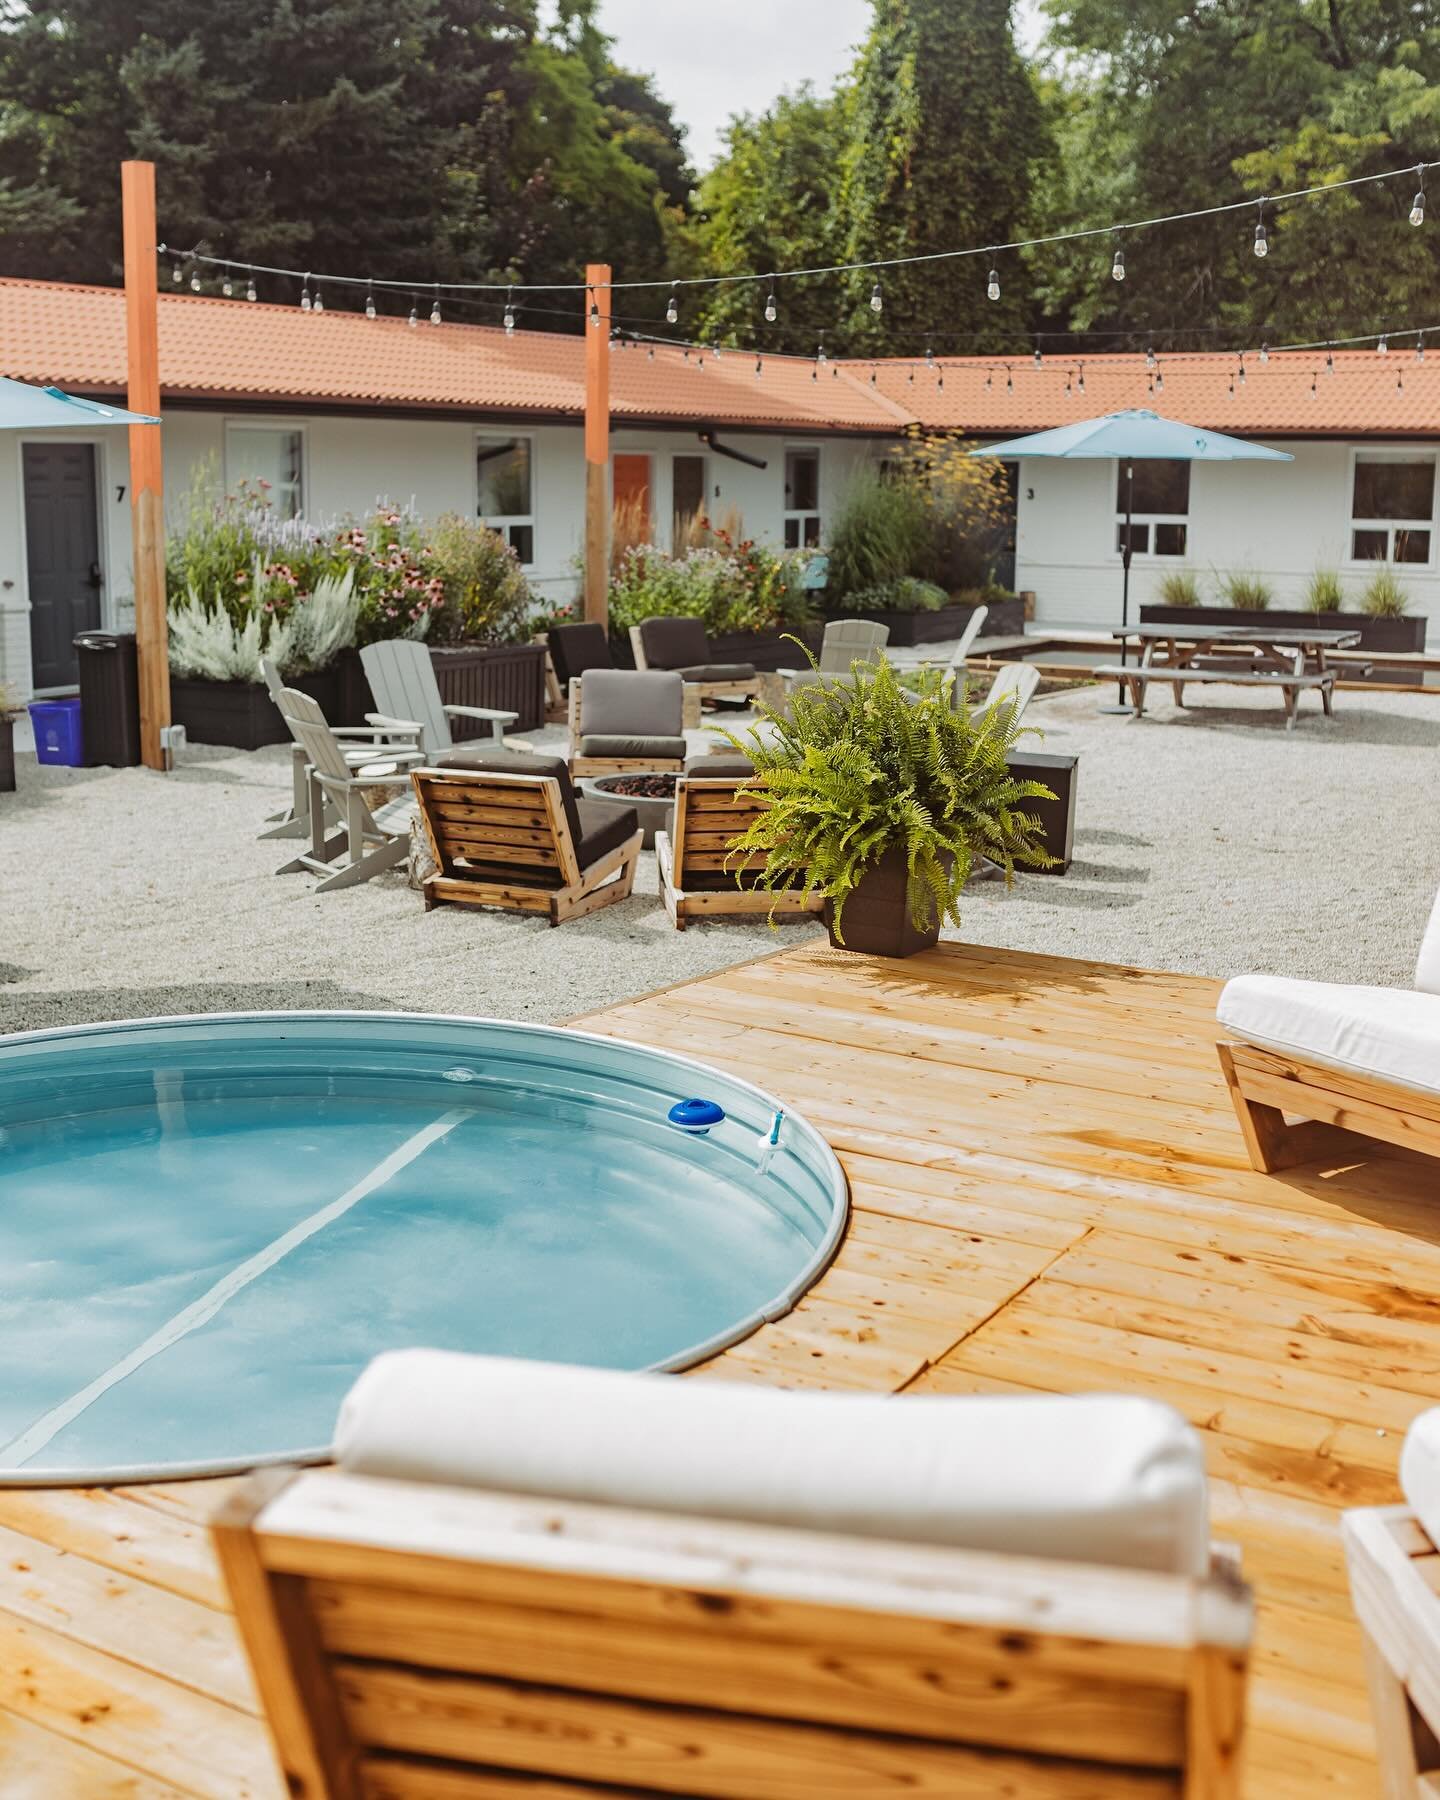 MAY 17-20 ✨ Why stay at Penny&rsquo;s Motel this May Long Weekend? 

We&rsquo;ve got a weekend packed full of activities for ALL! Only a few rooms left, so grab your room today!

Friday Evening 17th 🧖&zwj;♀️🌙 Sauna Social led by @ryanmarkham @moonl